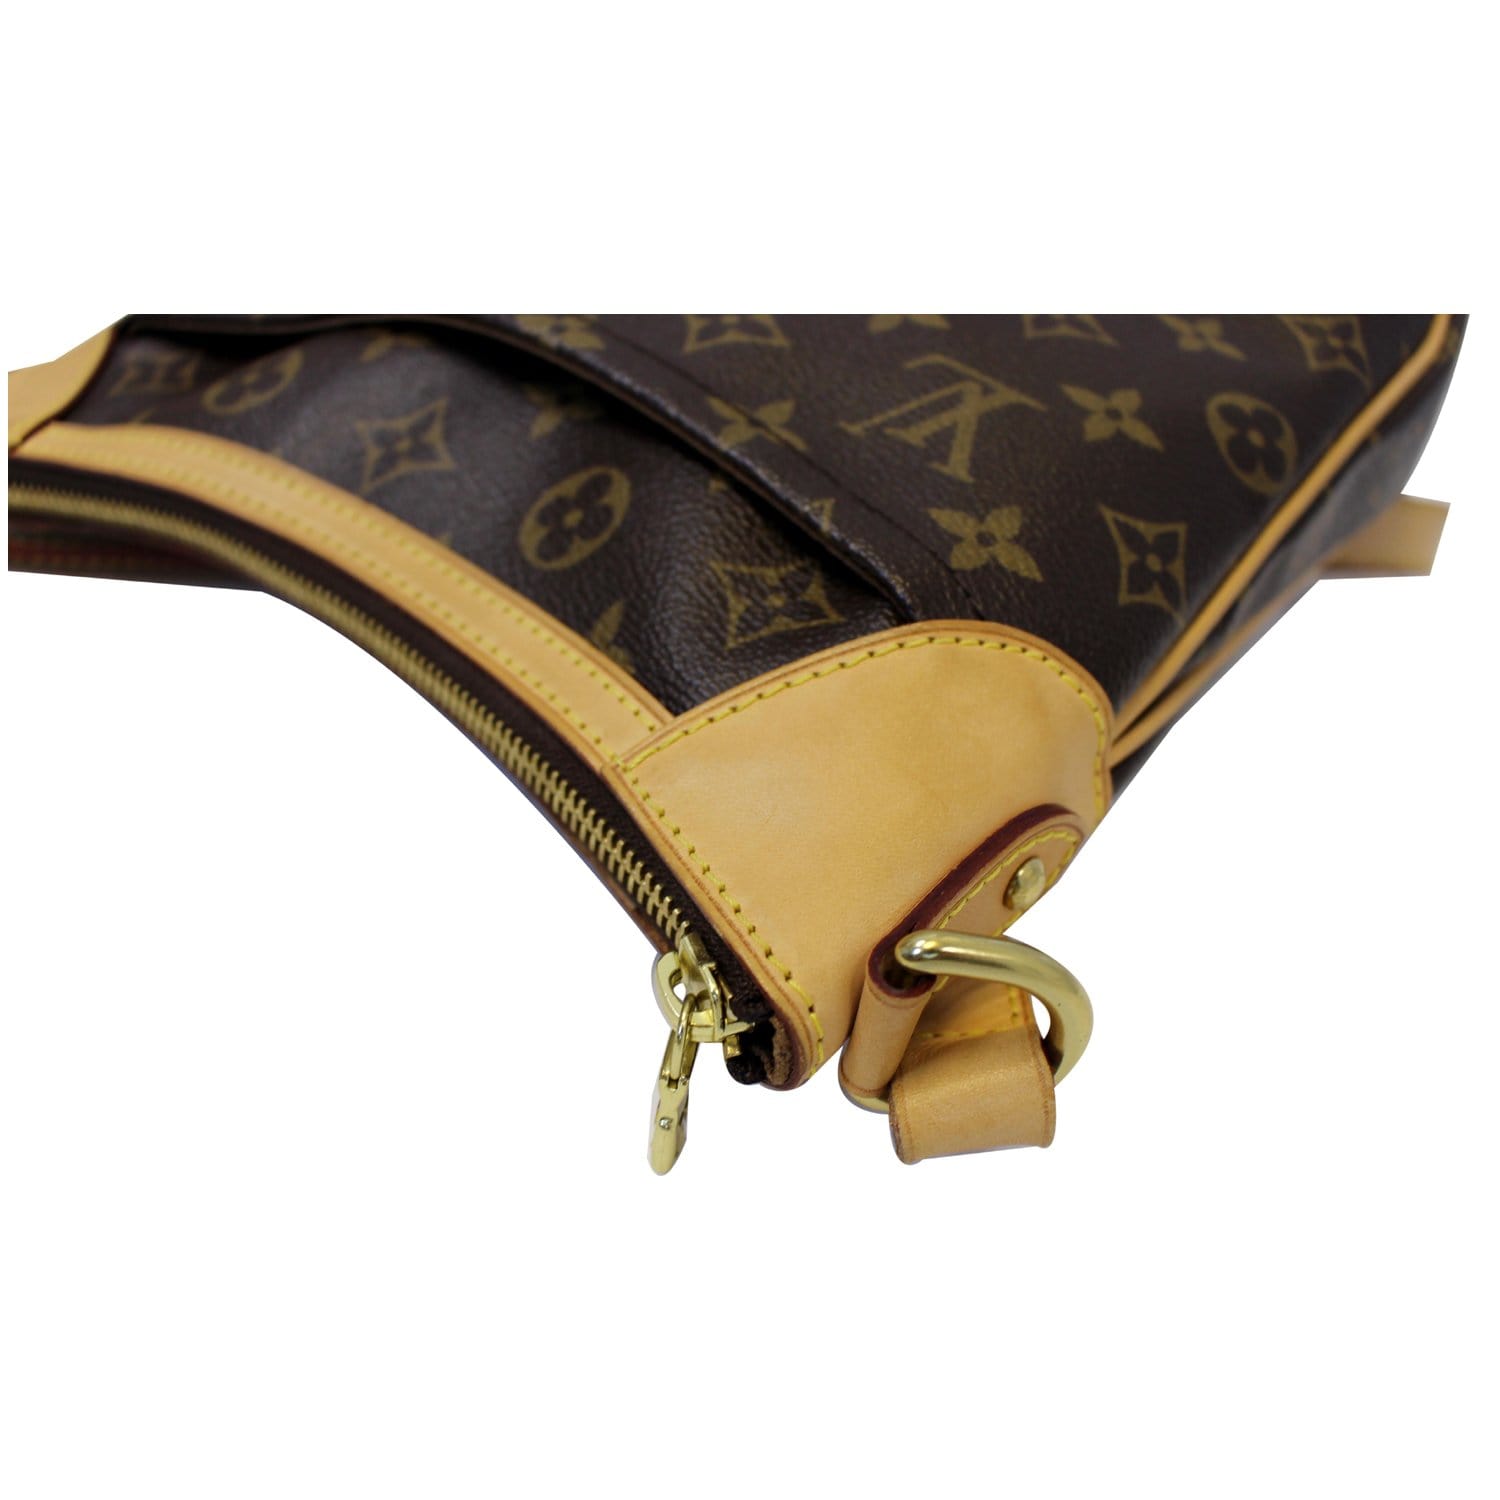 🔥 SPECIAL Louis Vuitton ODEON PM monogram NEW IN BOX, INVOICE SHIP FROM  FRANCE